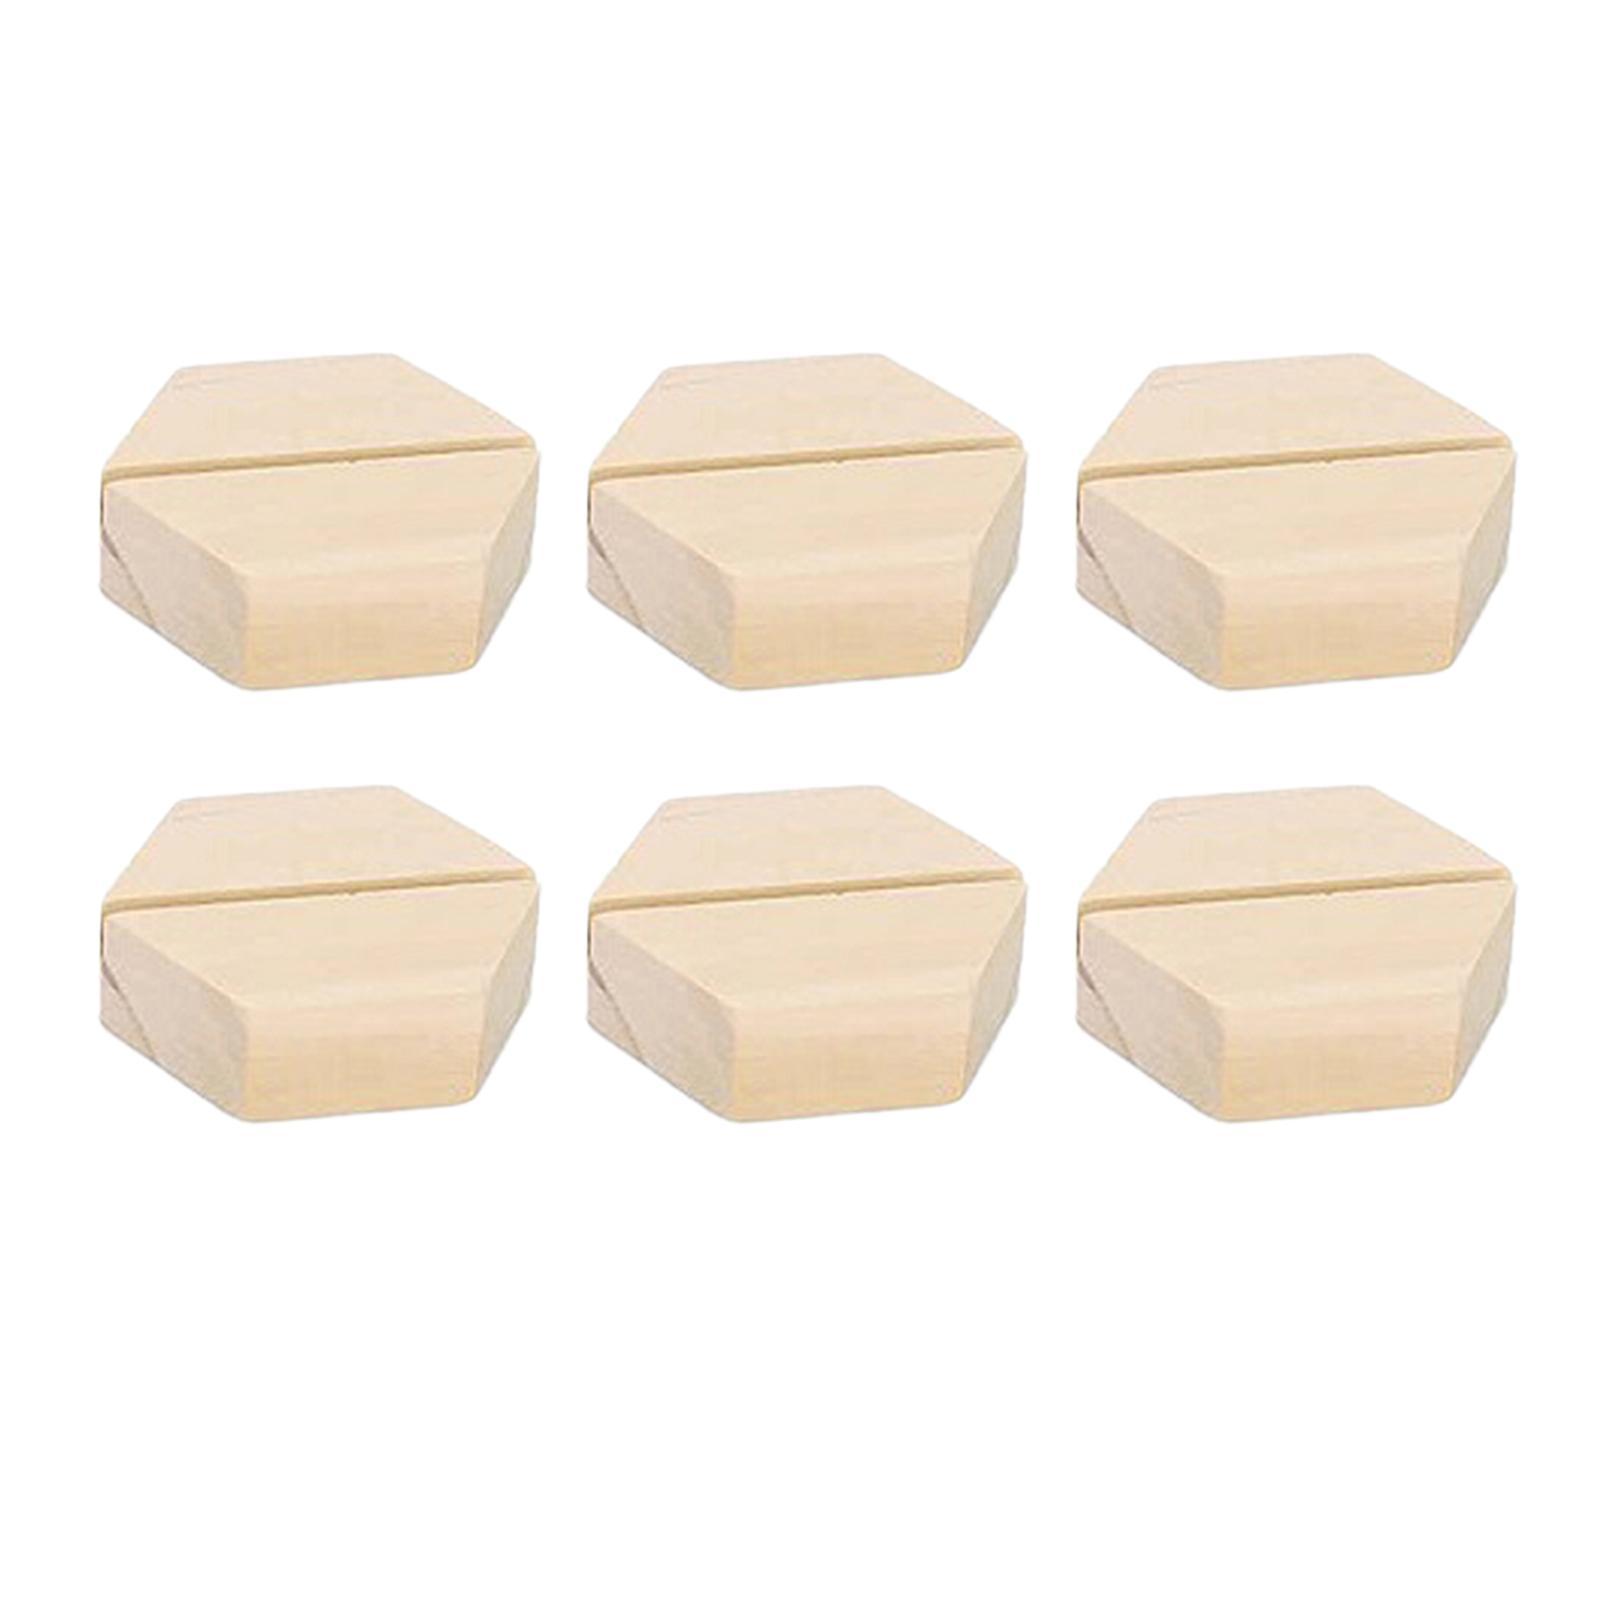 Hexagon Rustic Wooden Place Card Holders Set of 6 for Home Wedding Christmas